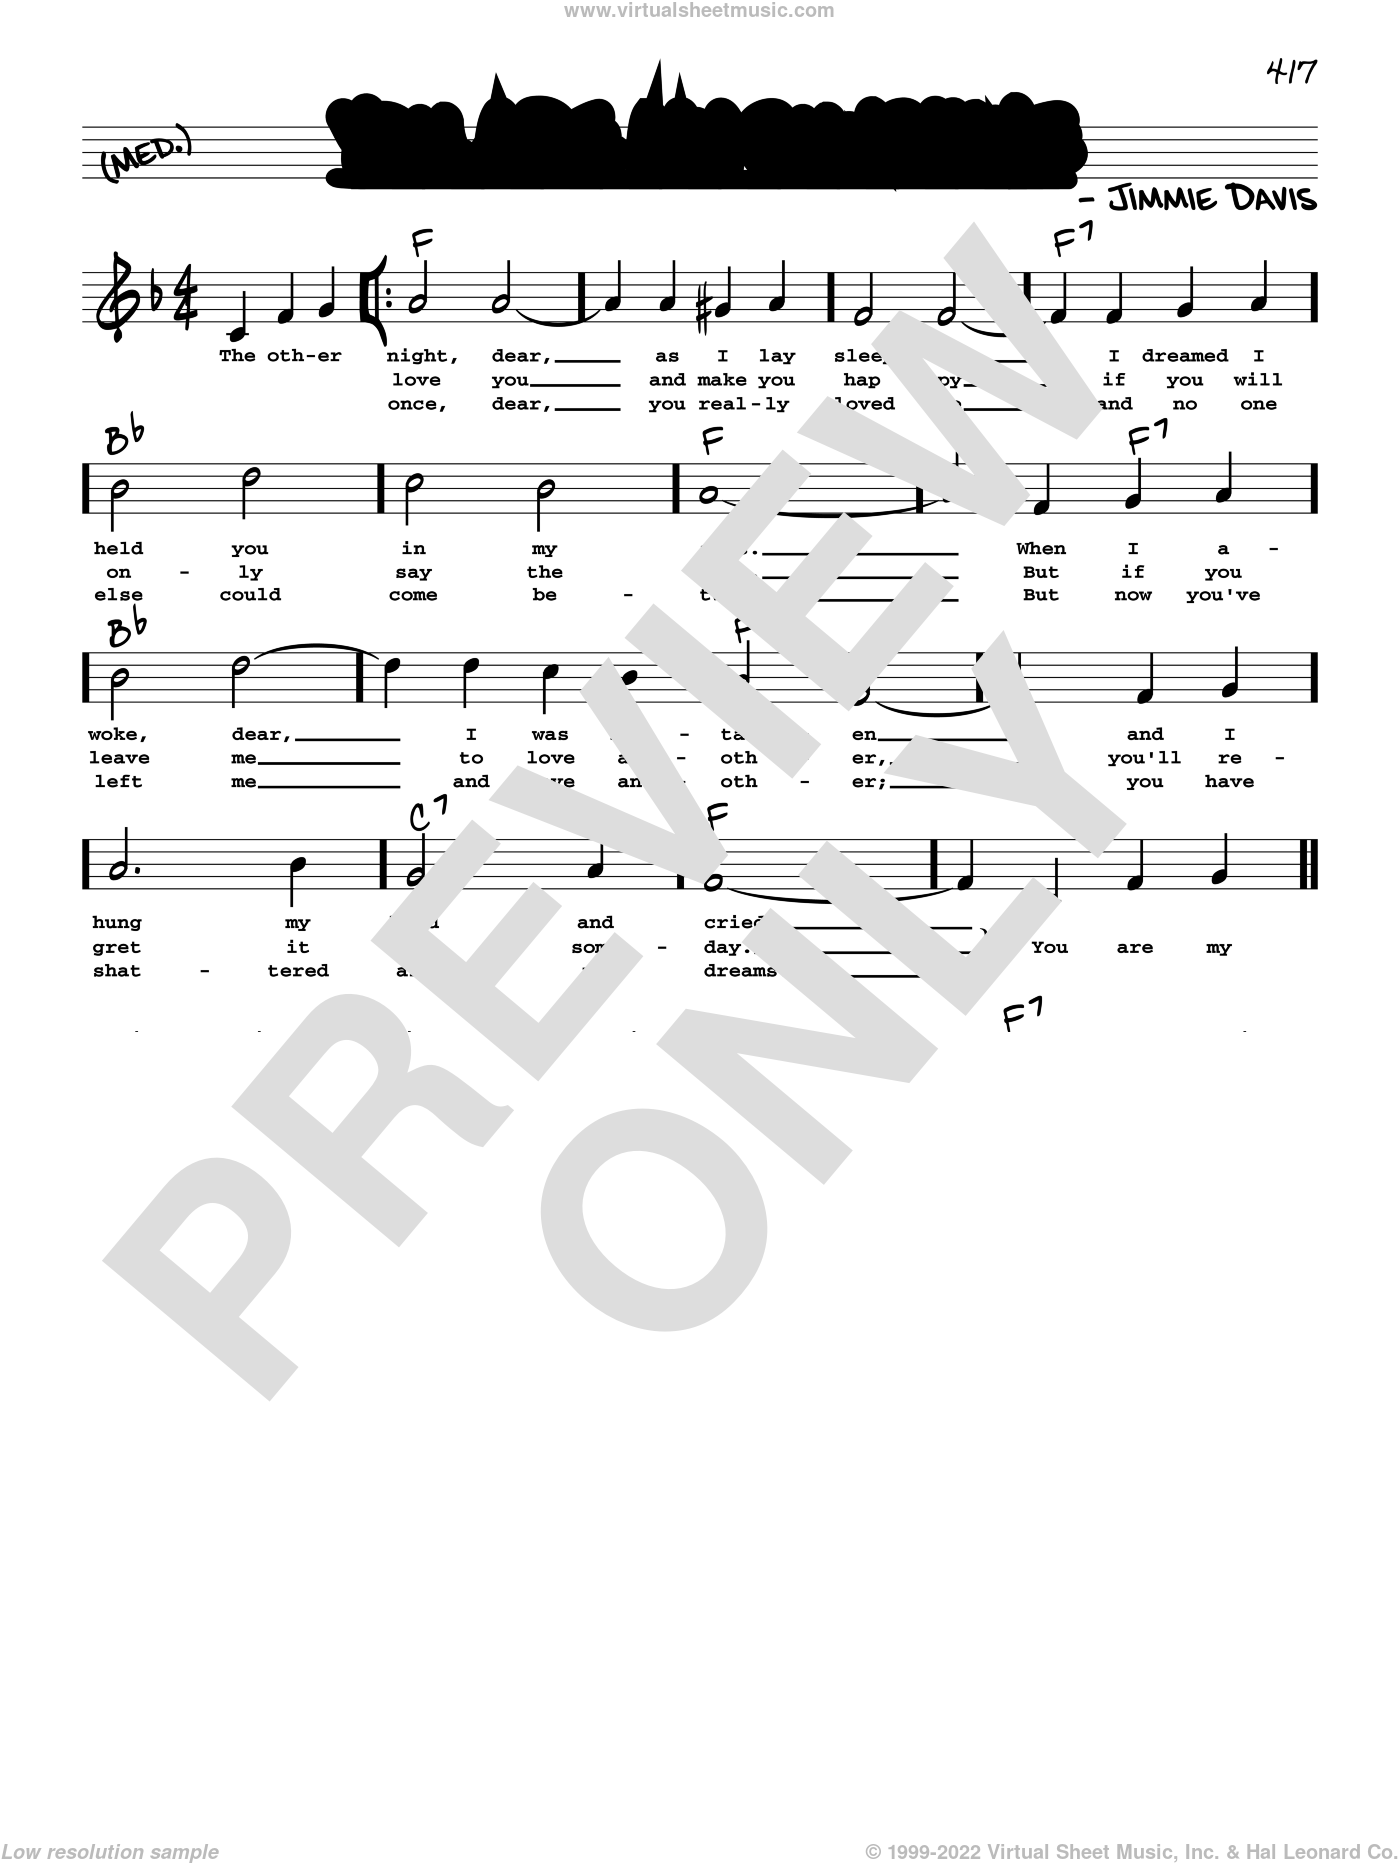 You Are My Sunshine by Ray Charles - Easy Piano - Digital Sheet